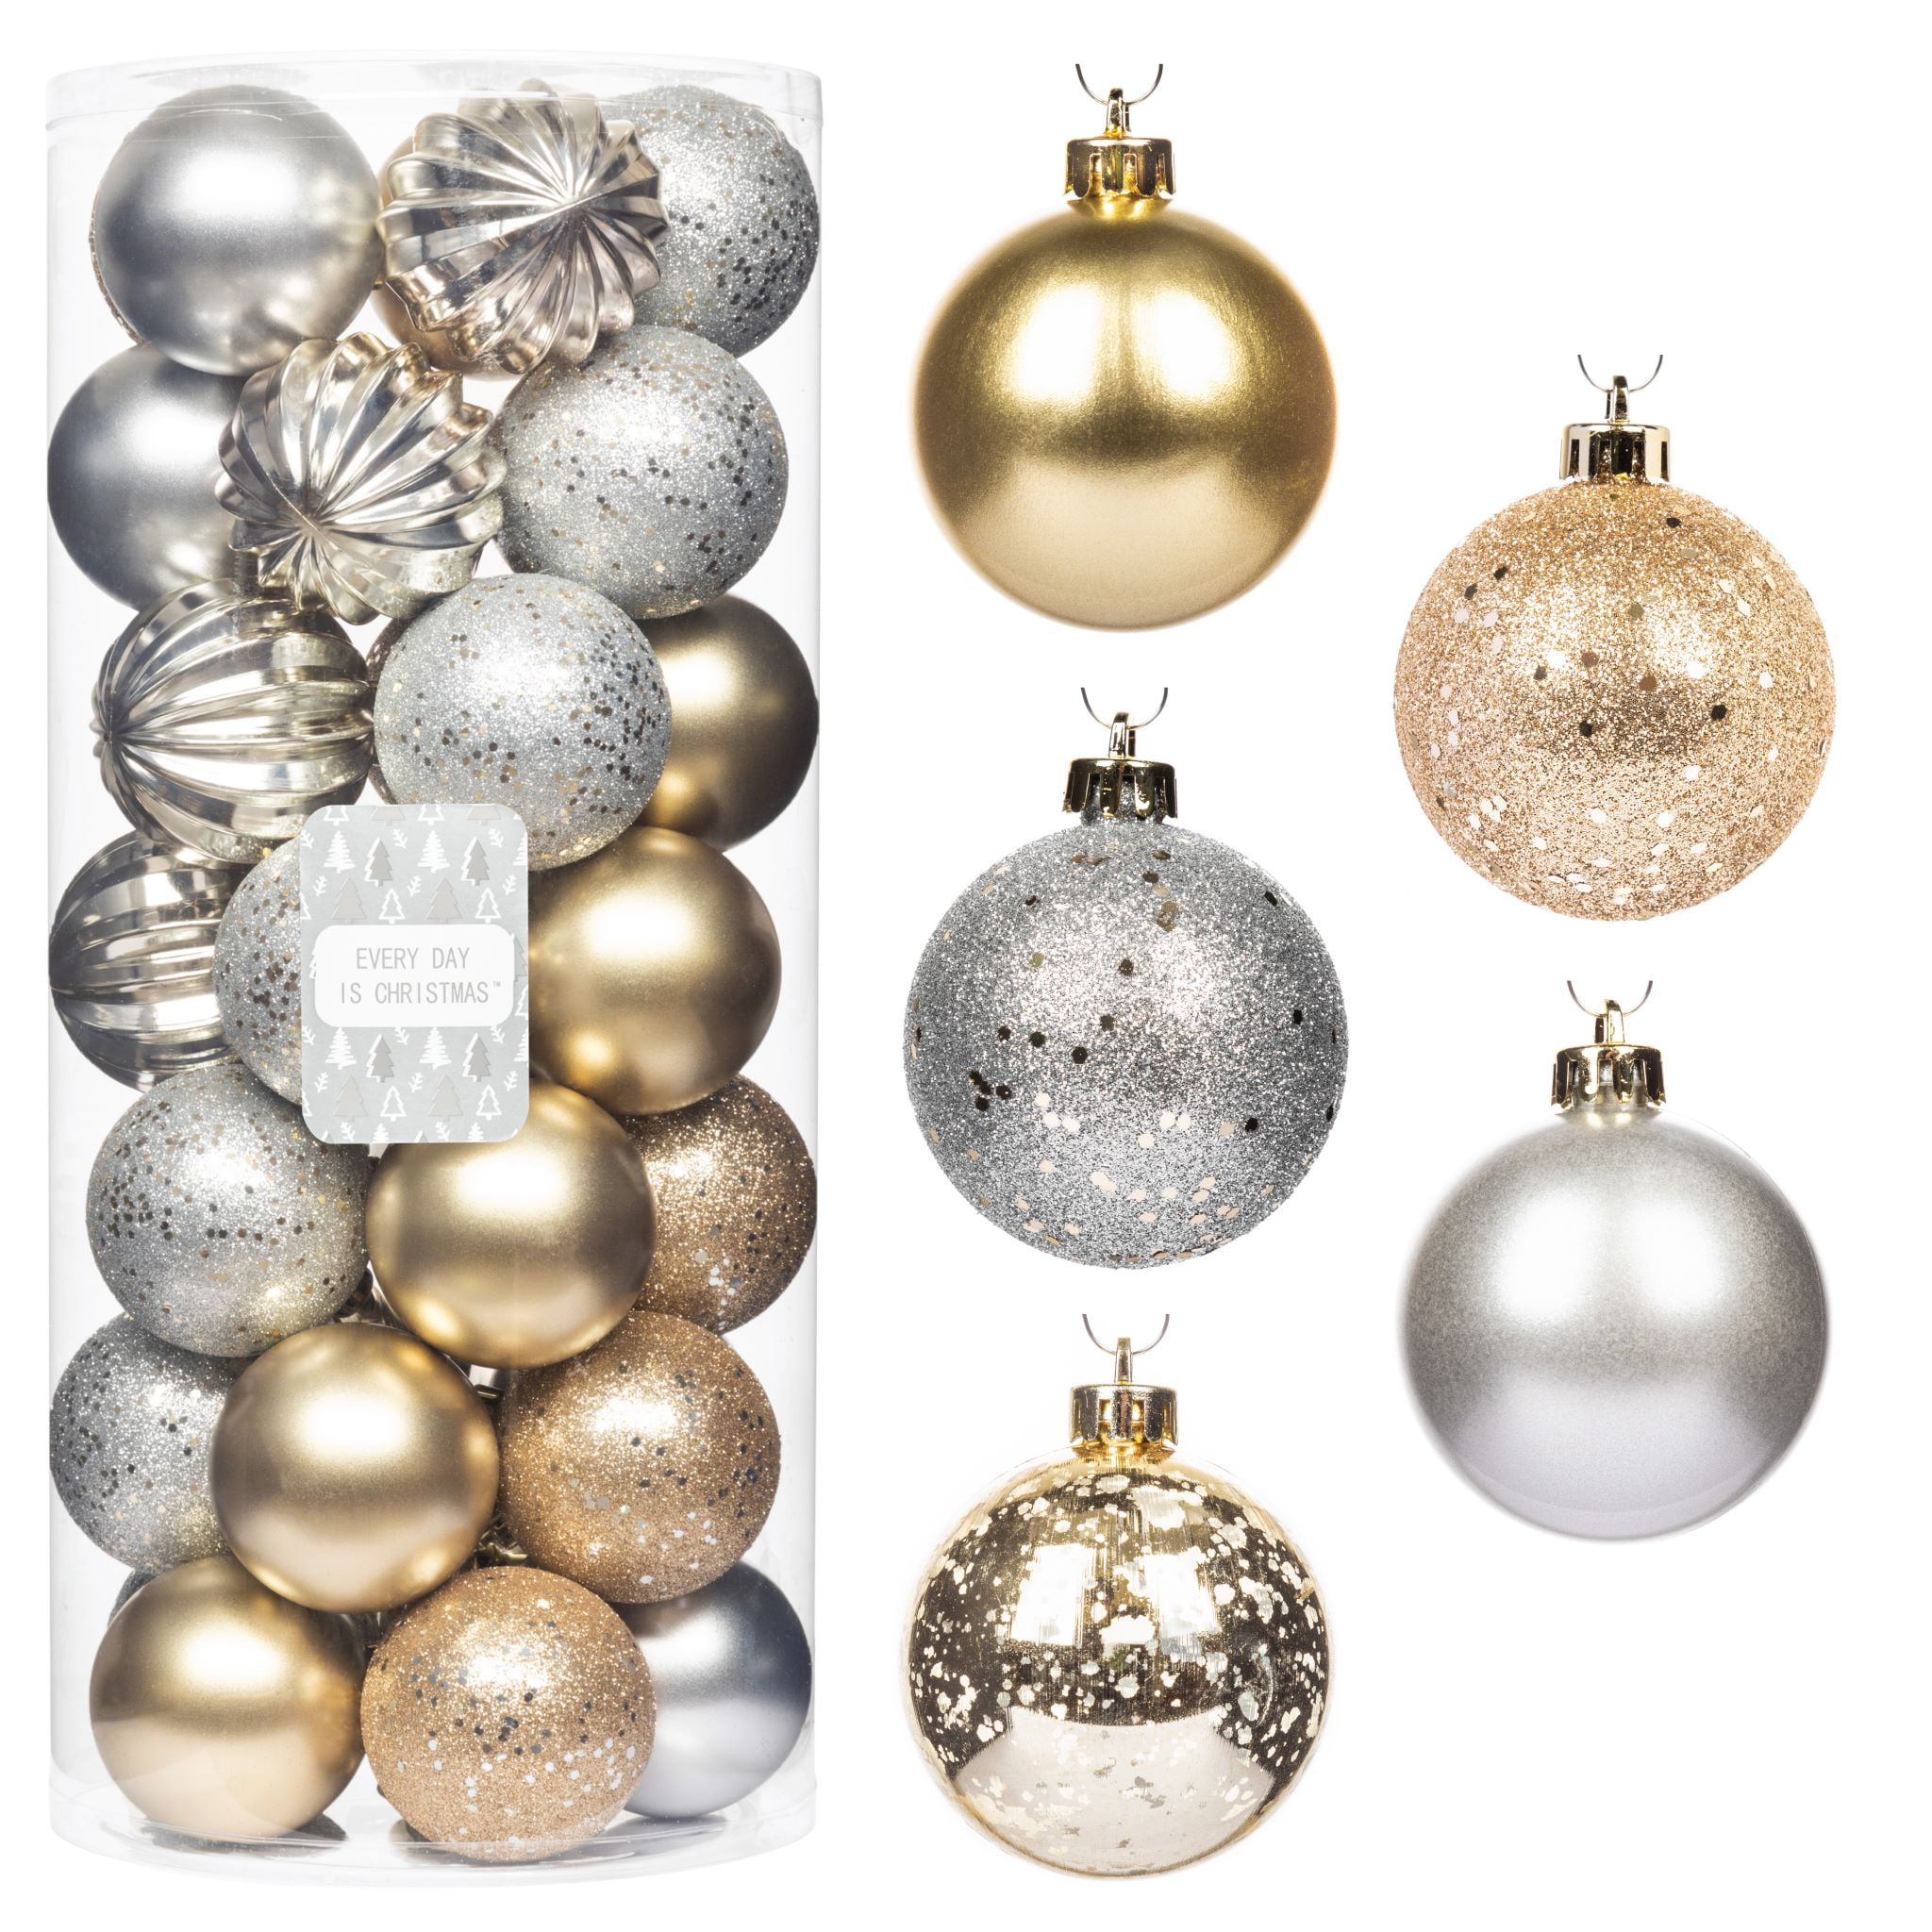 Every Day is Christmas Ornaments, Shatterproof Christmas Tree Ornament Set,  Christmas Balls Decoration 35 Count (2.75/70mm, Gold Iridium)